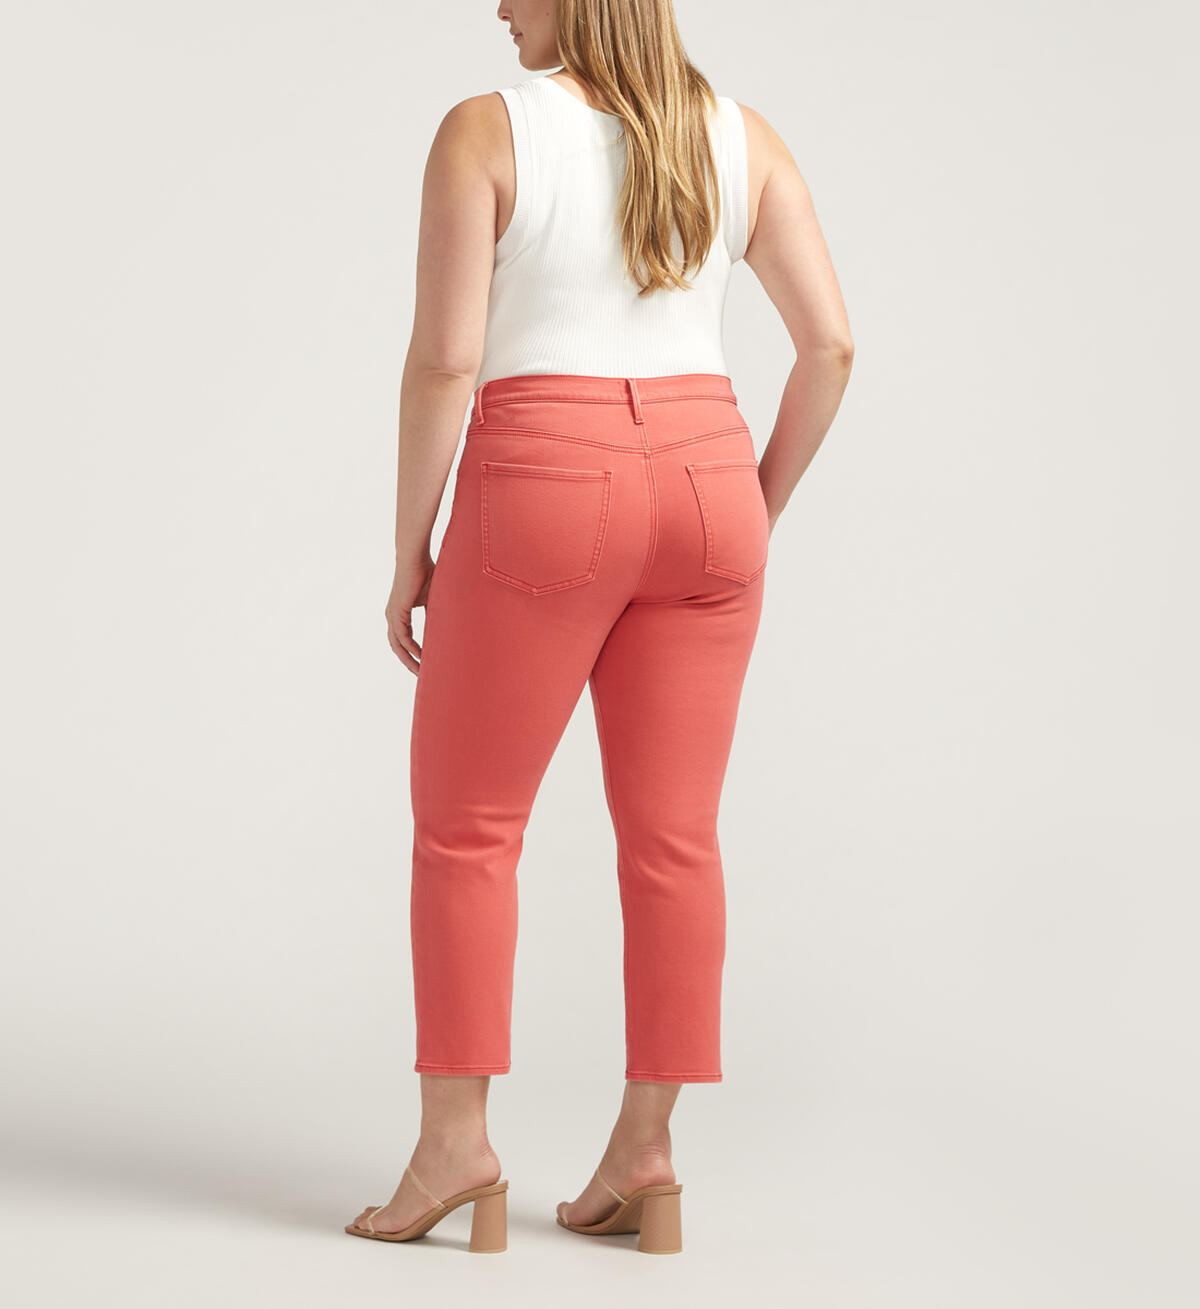 Cassie Mid Rise Cropped Pants Plus Size, , hi-res image number 1